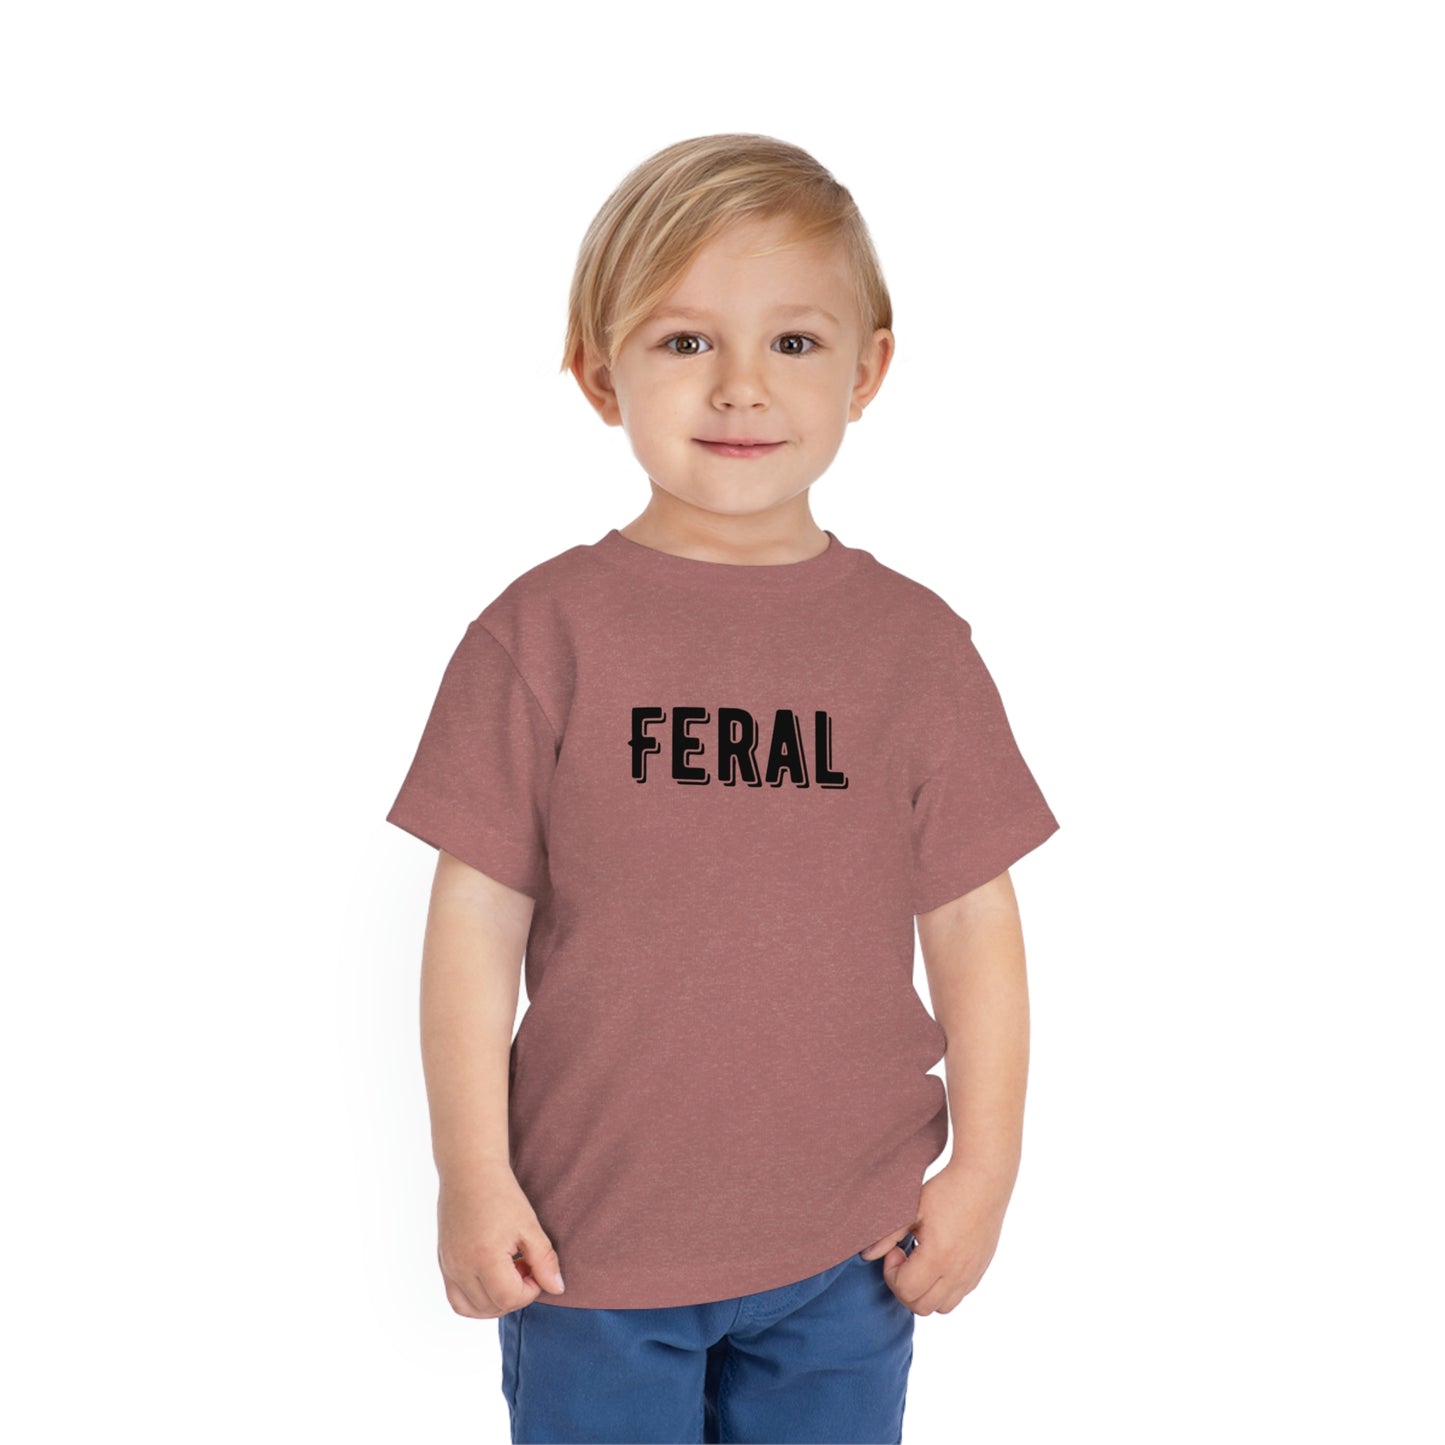 "Feral" Toddler Short Sleeve Tee (2T-5T)